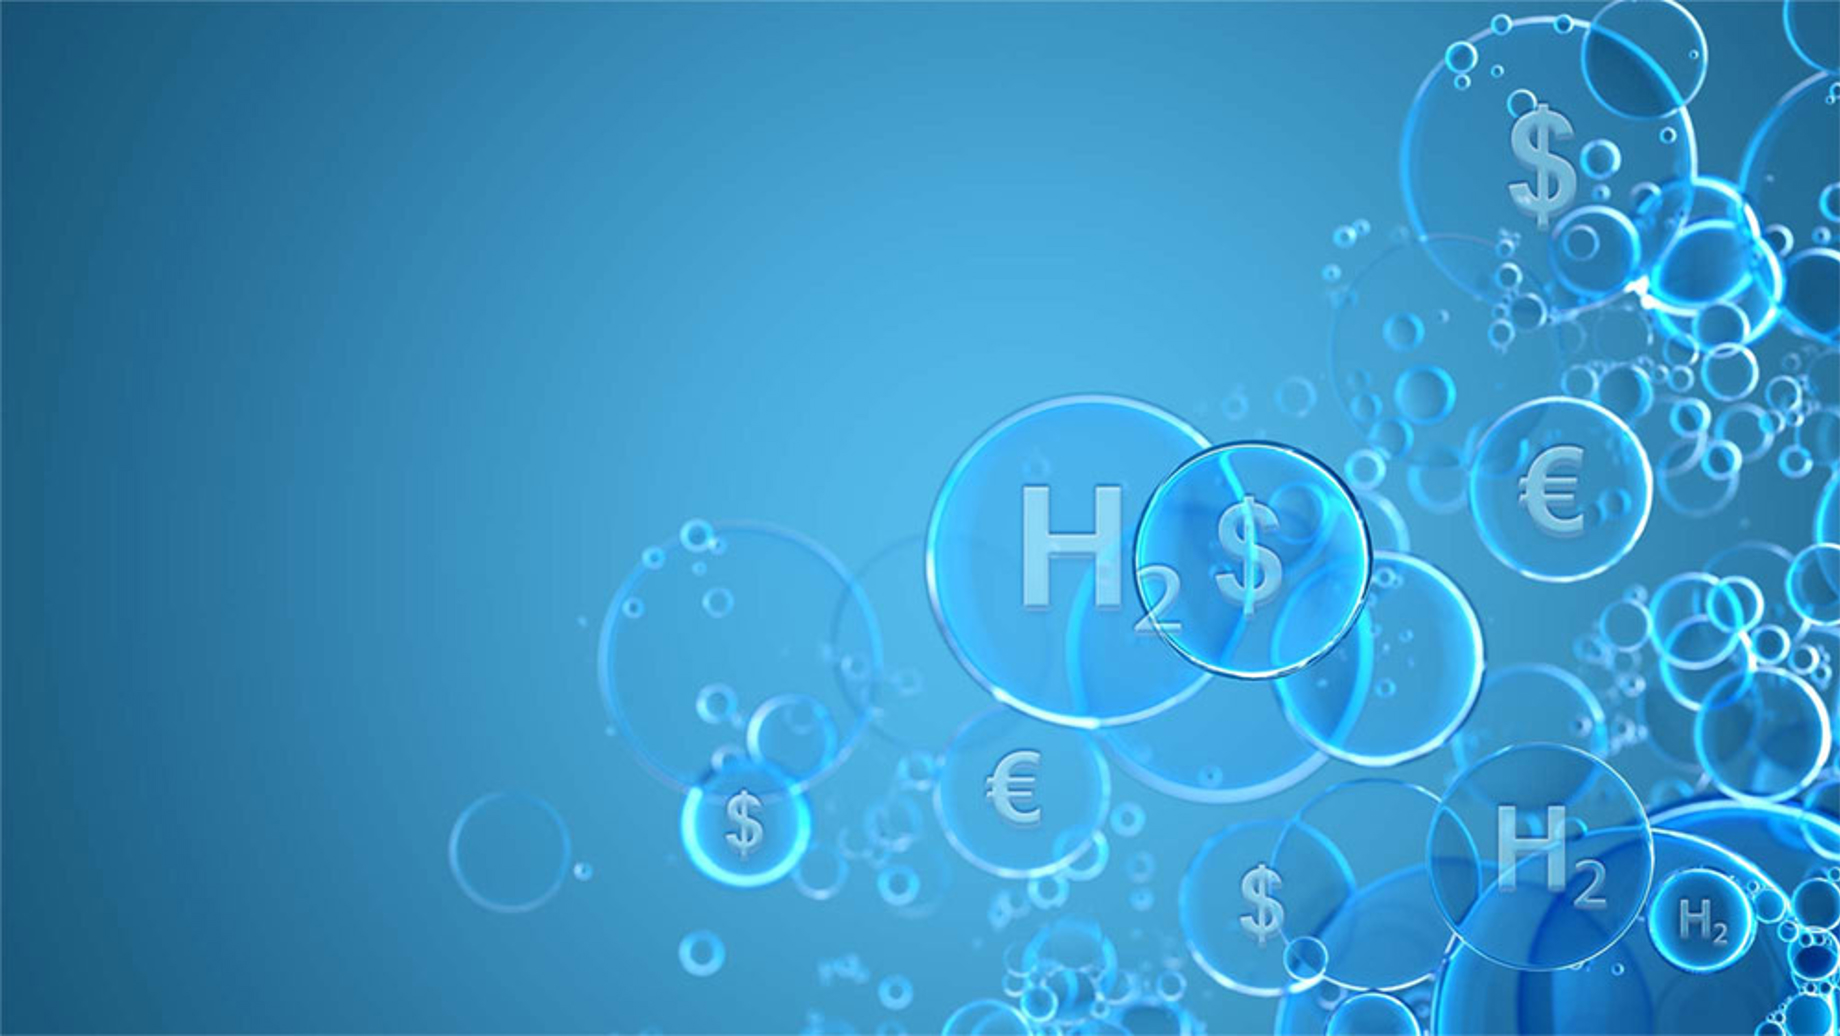 When will hydrogen become a competitive industry?